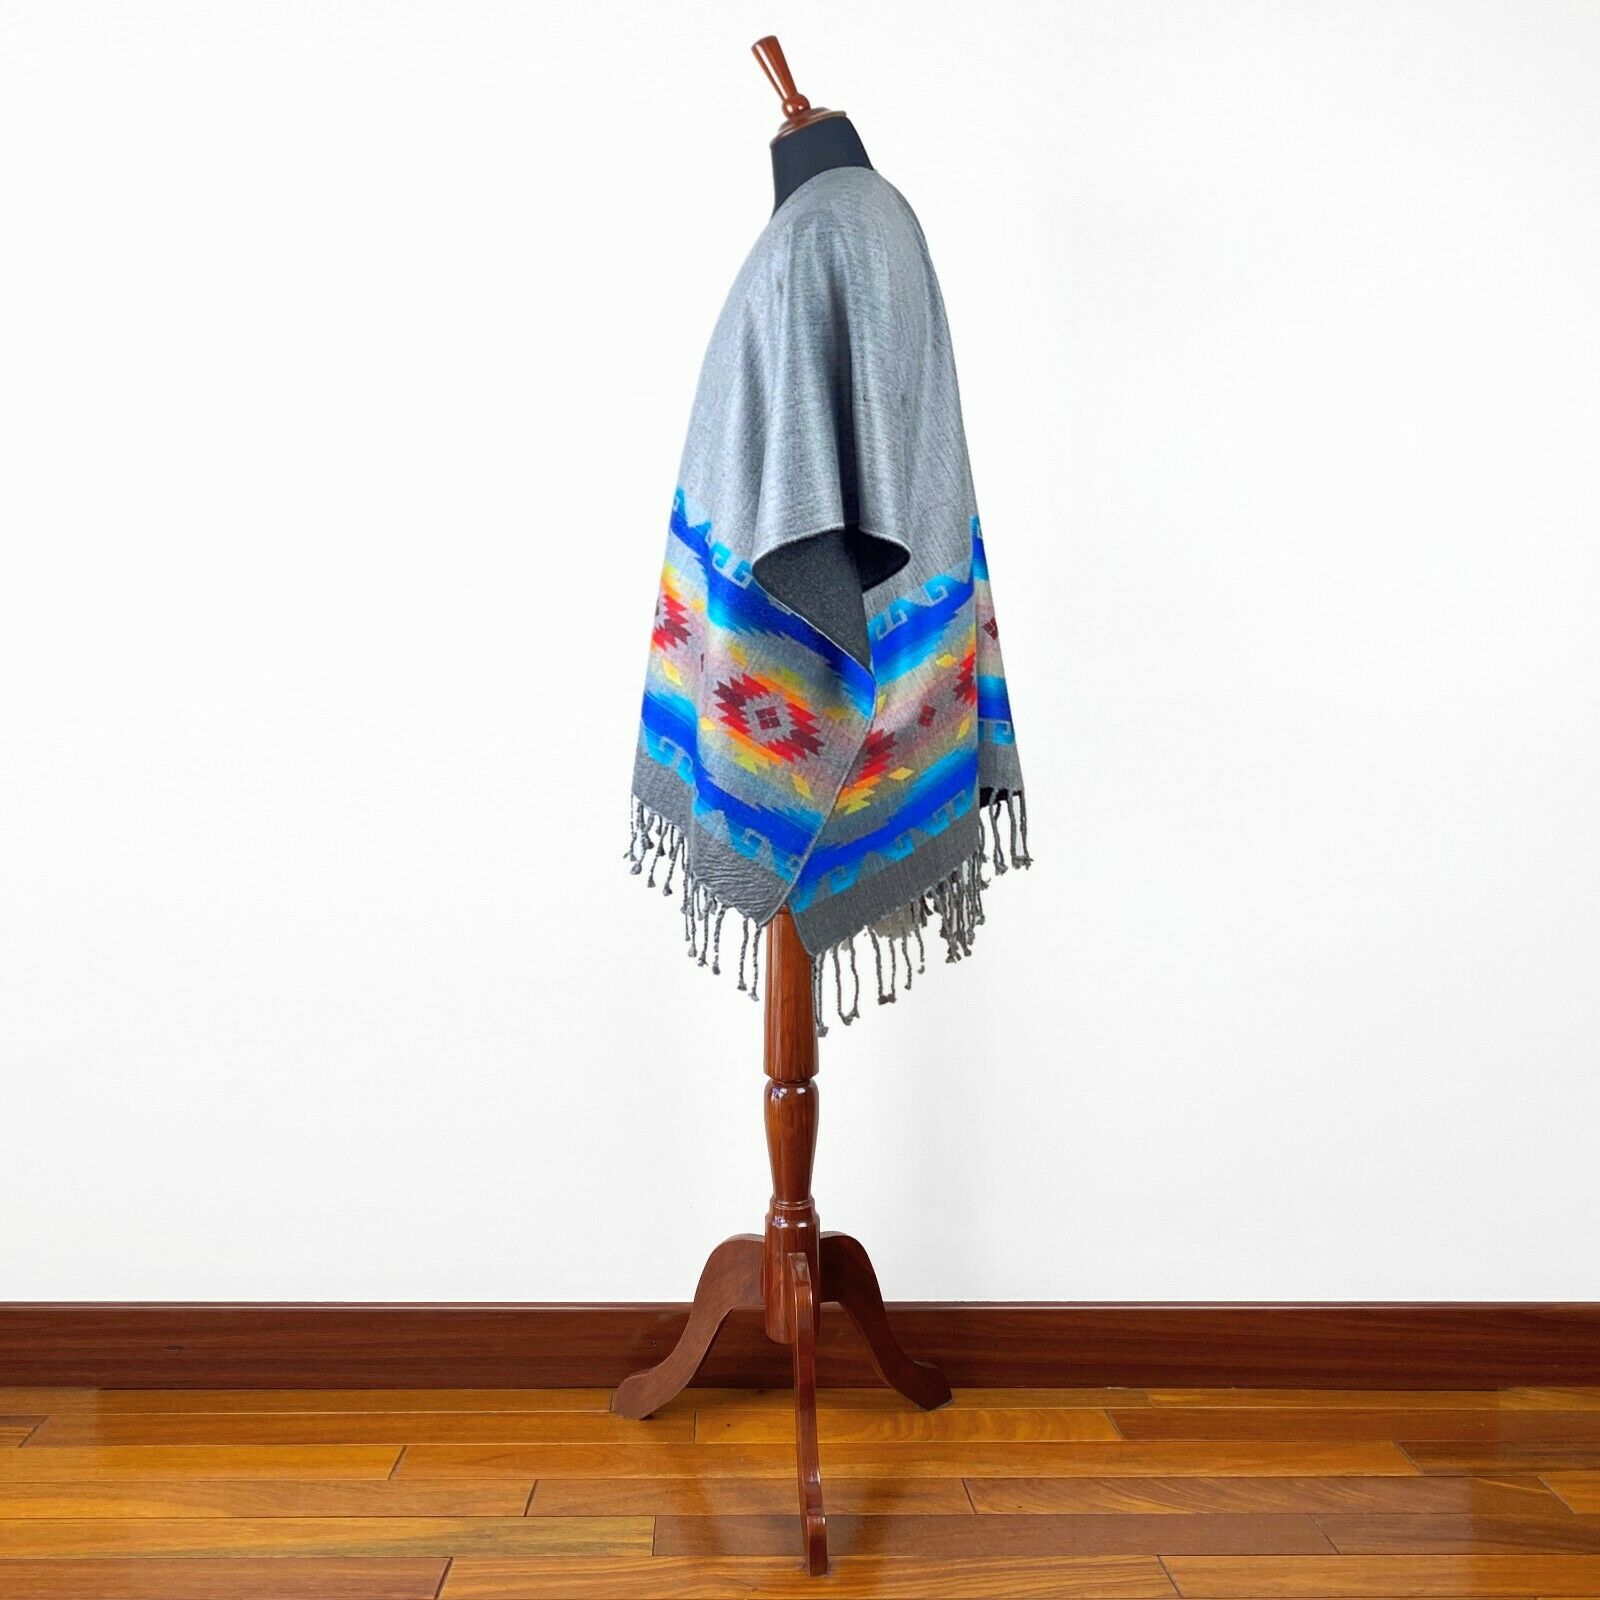 Lightweight Thin Alpaca Wool UNISEX Ruana Cape Poncho/Shawl - Carbon with authentic pattern